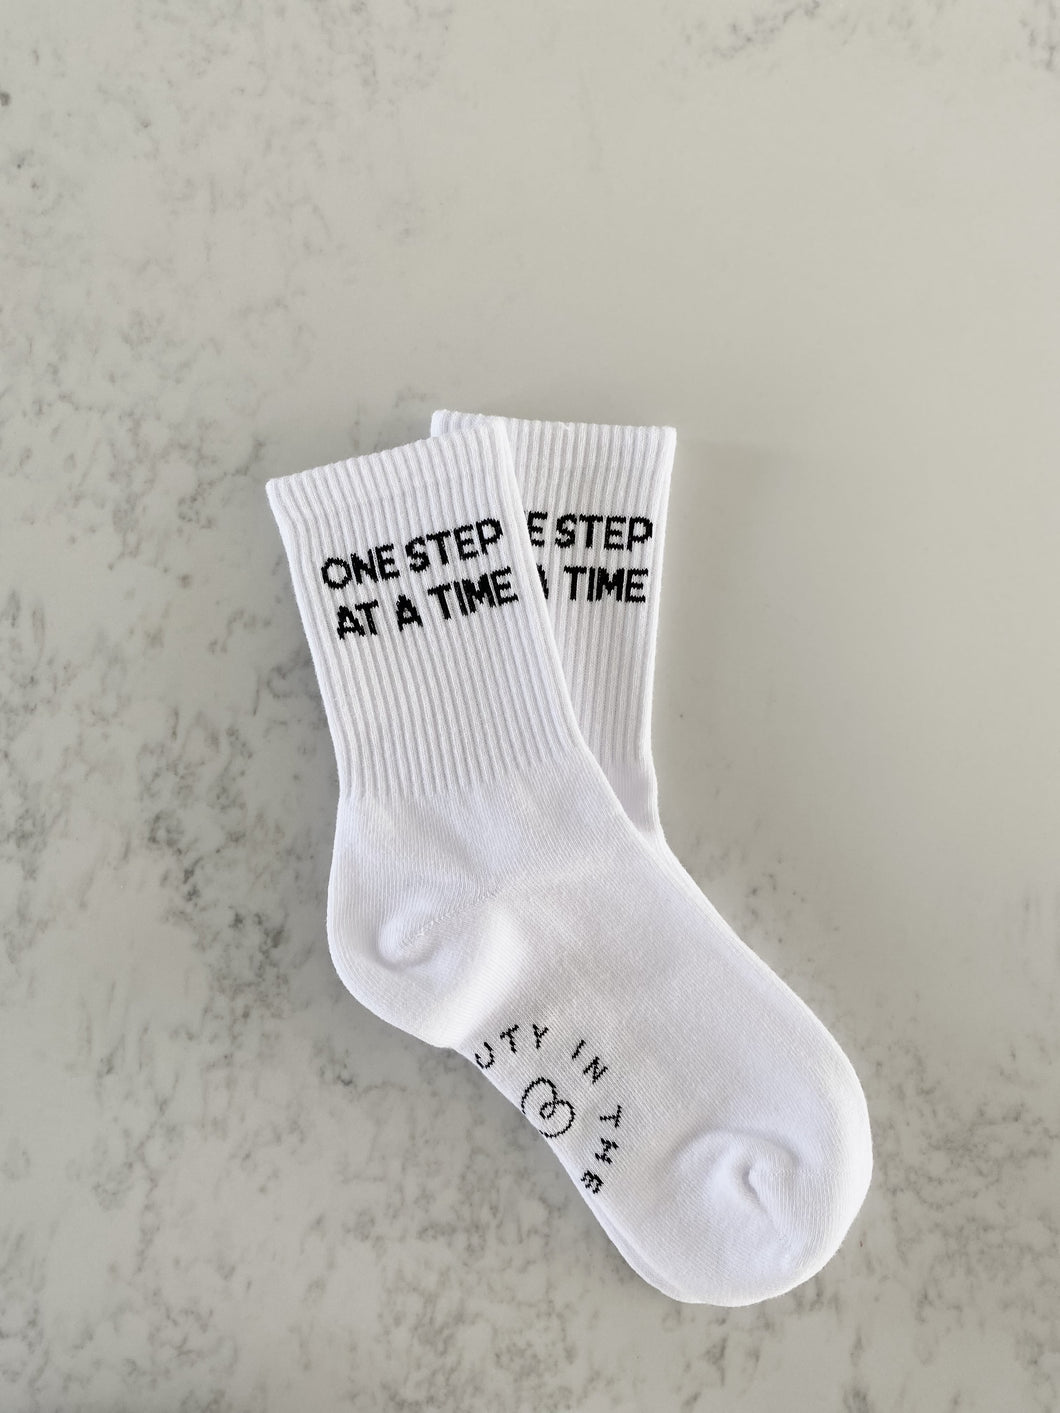 One Step at a Time - Slogan Crew Socks